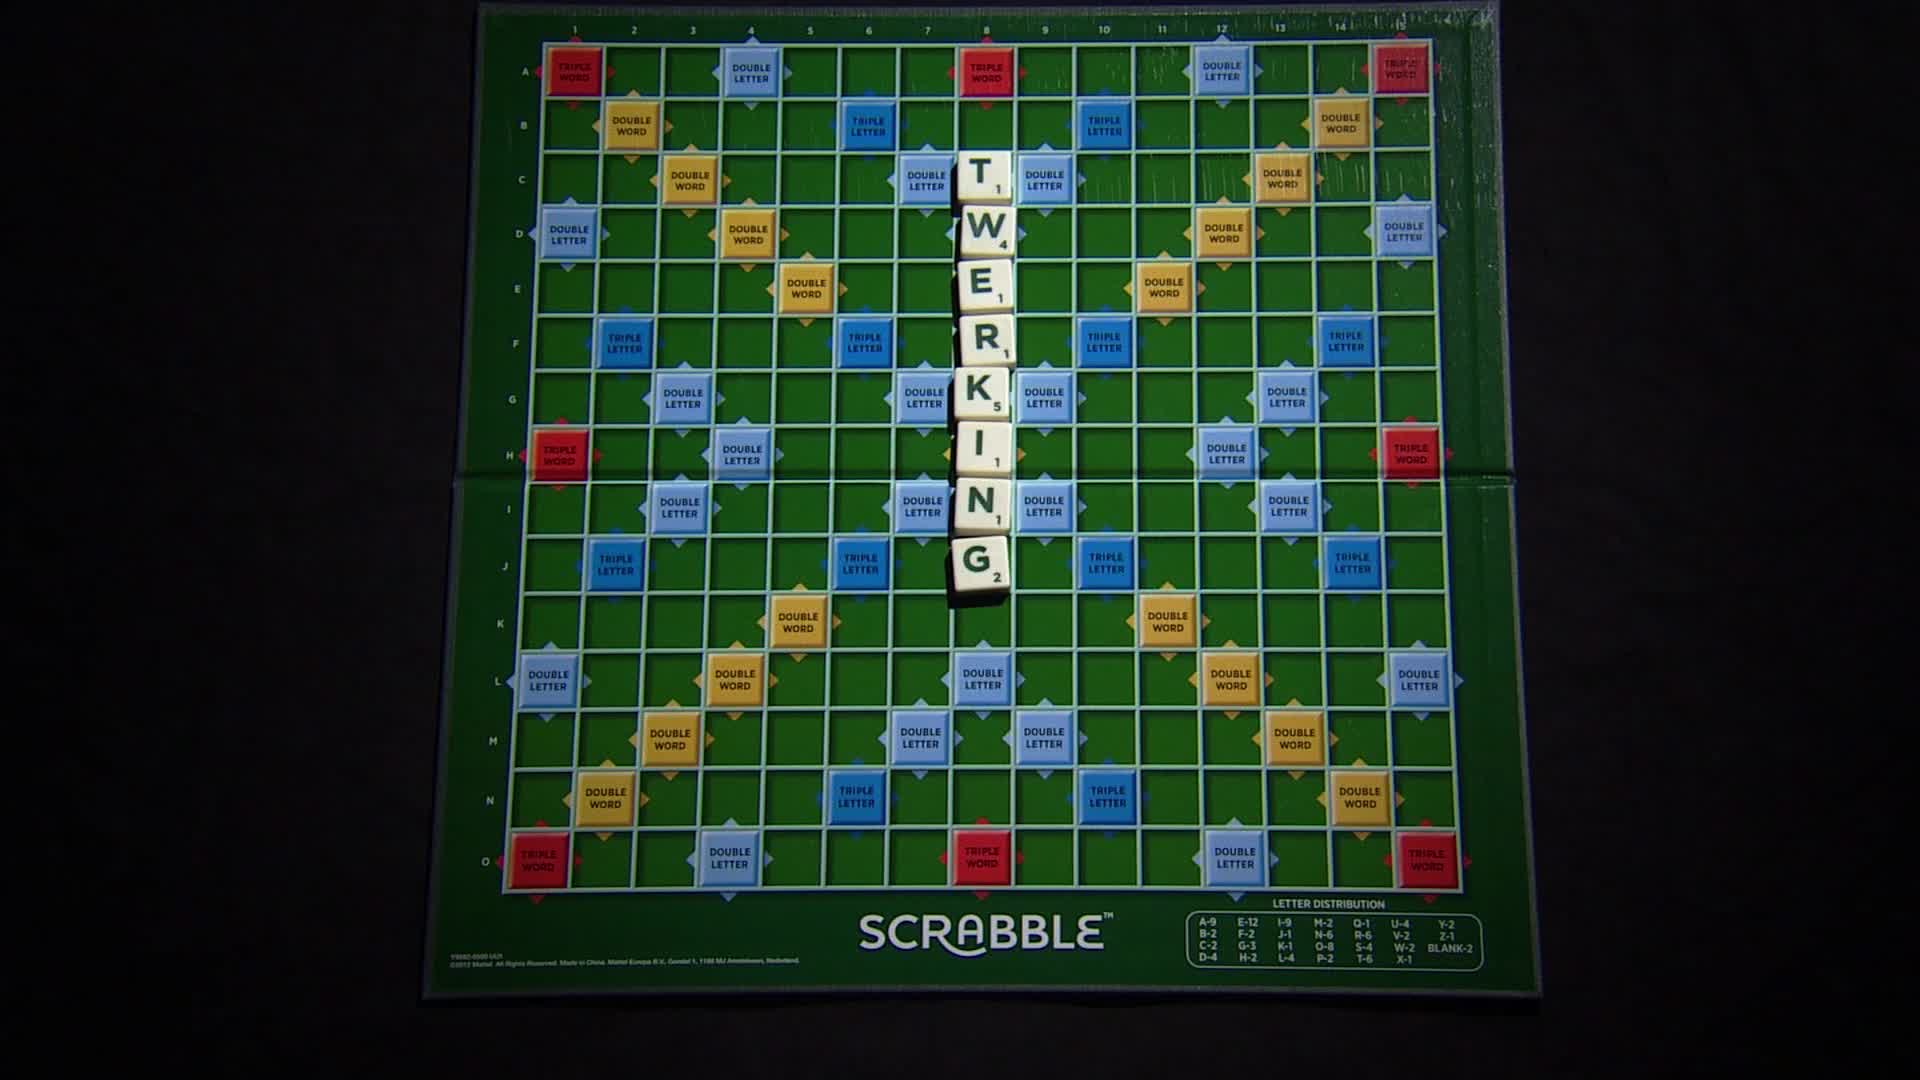 You can play OK on Scrabble now!